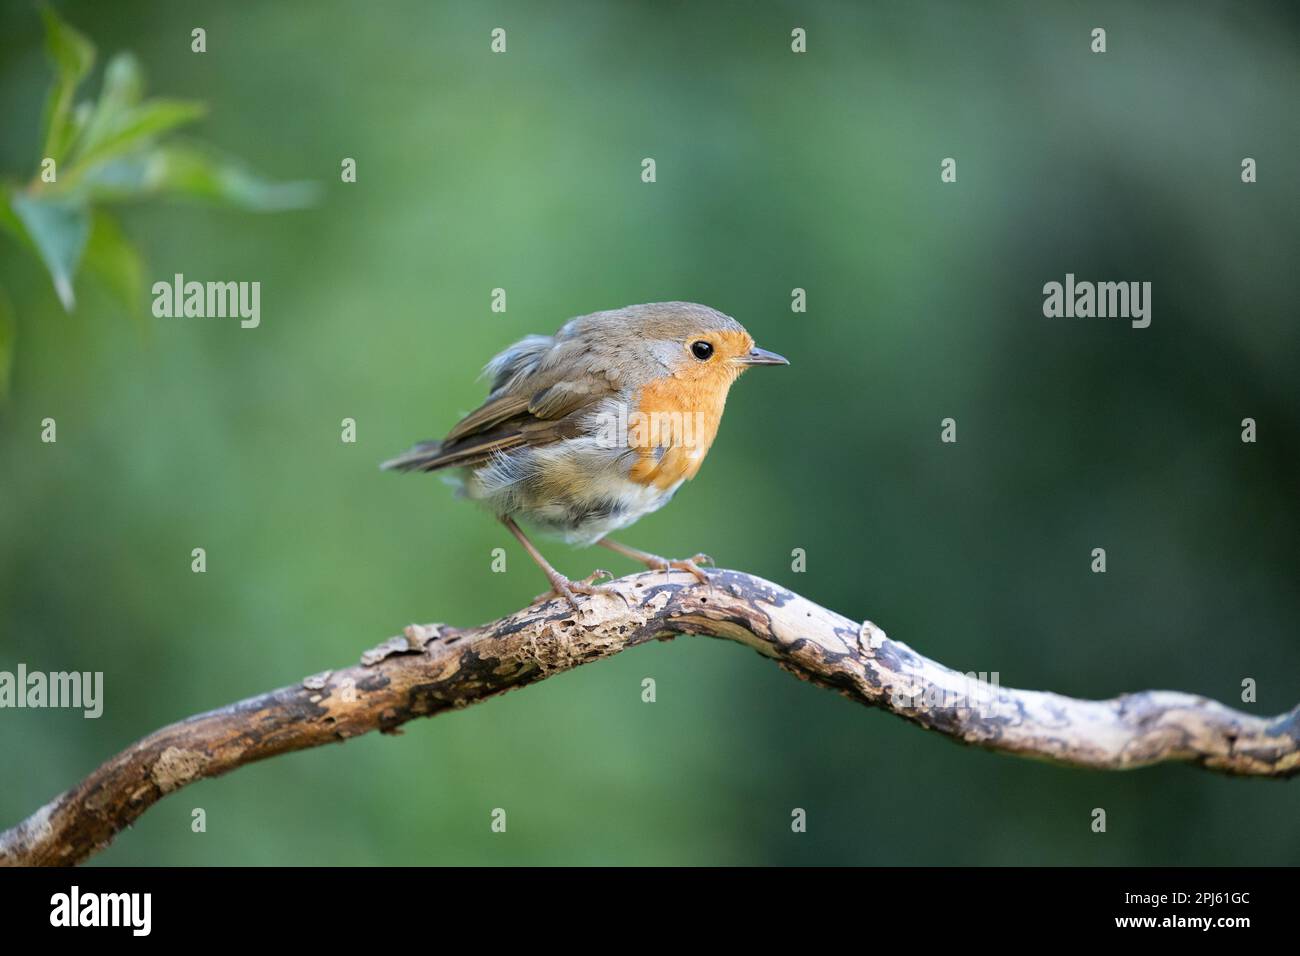 Tailless European Robin (Erithacus rubecula) perched on a branch in summer. Missing tail feathers - Yorkshire, UK (August 2022) Stock Photo